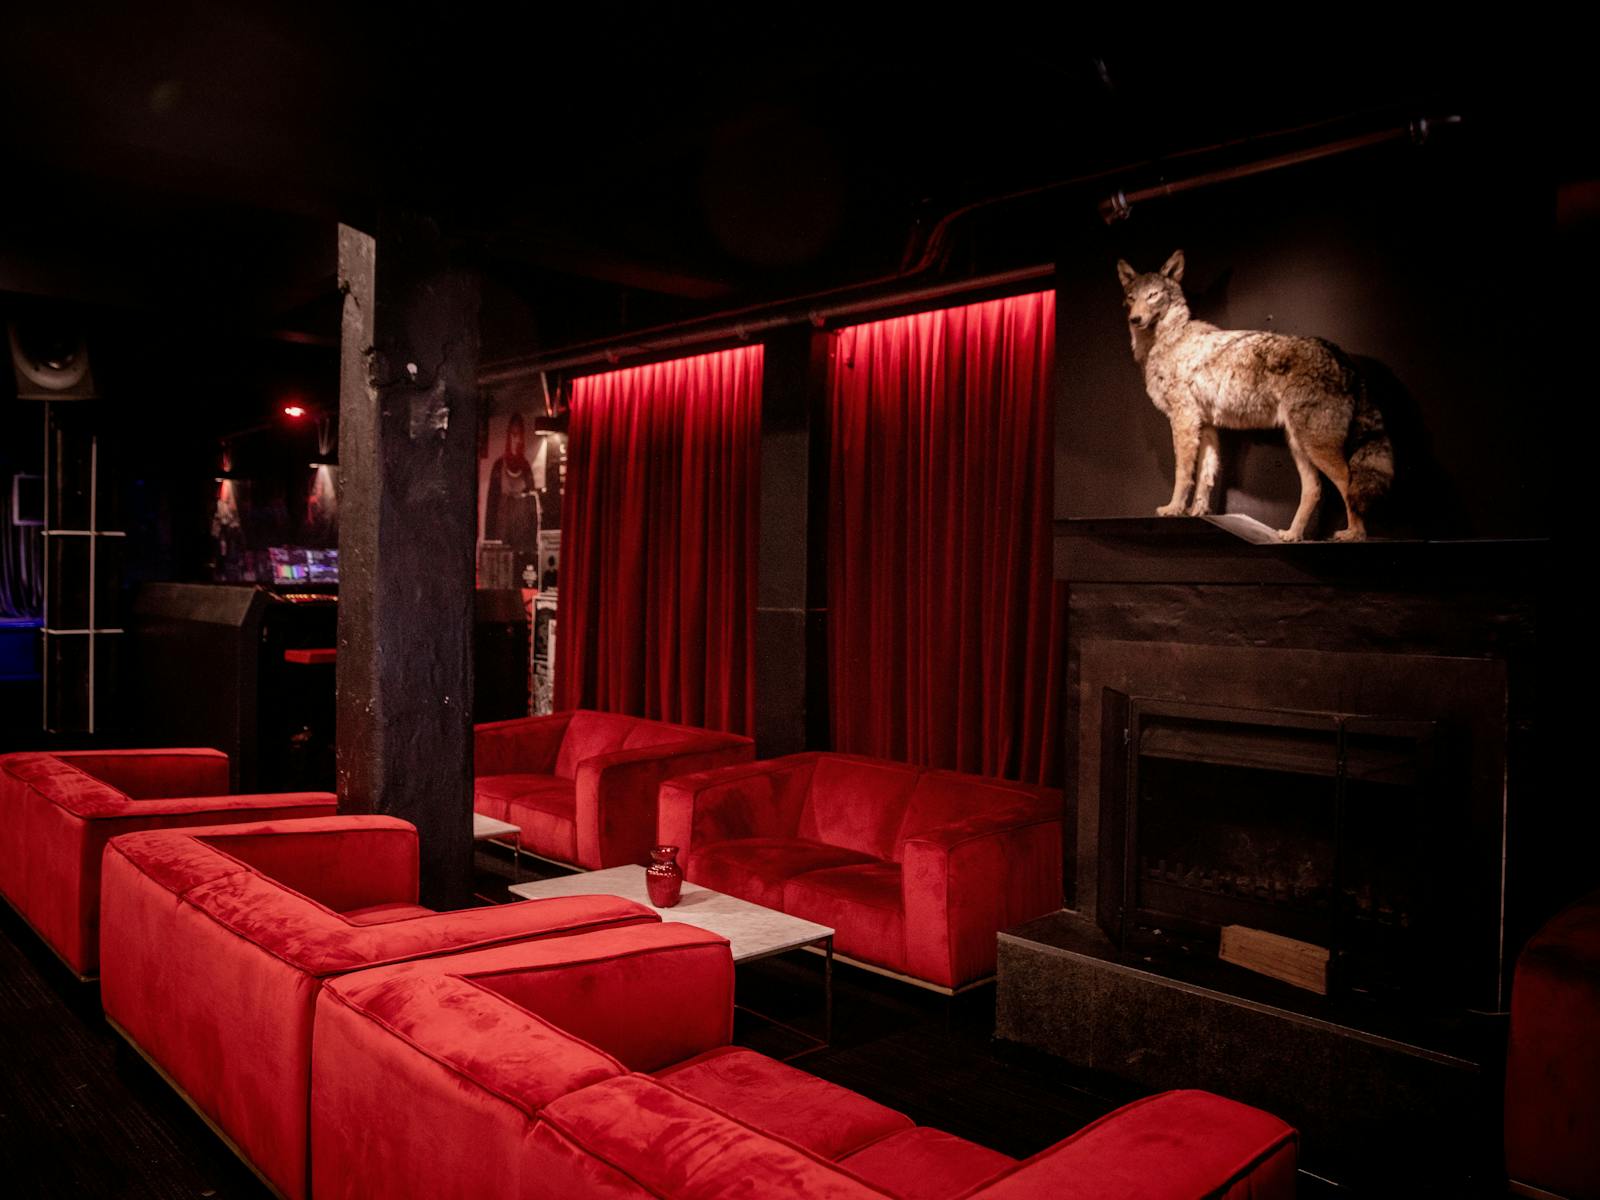 Altar's taxidermy coyote stands above the fireplace in the lounge bar with red velvet couches